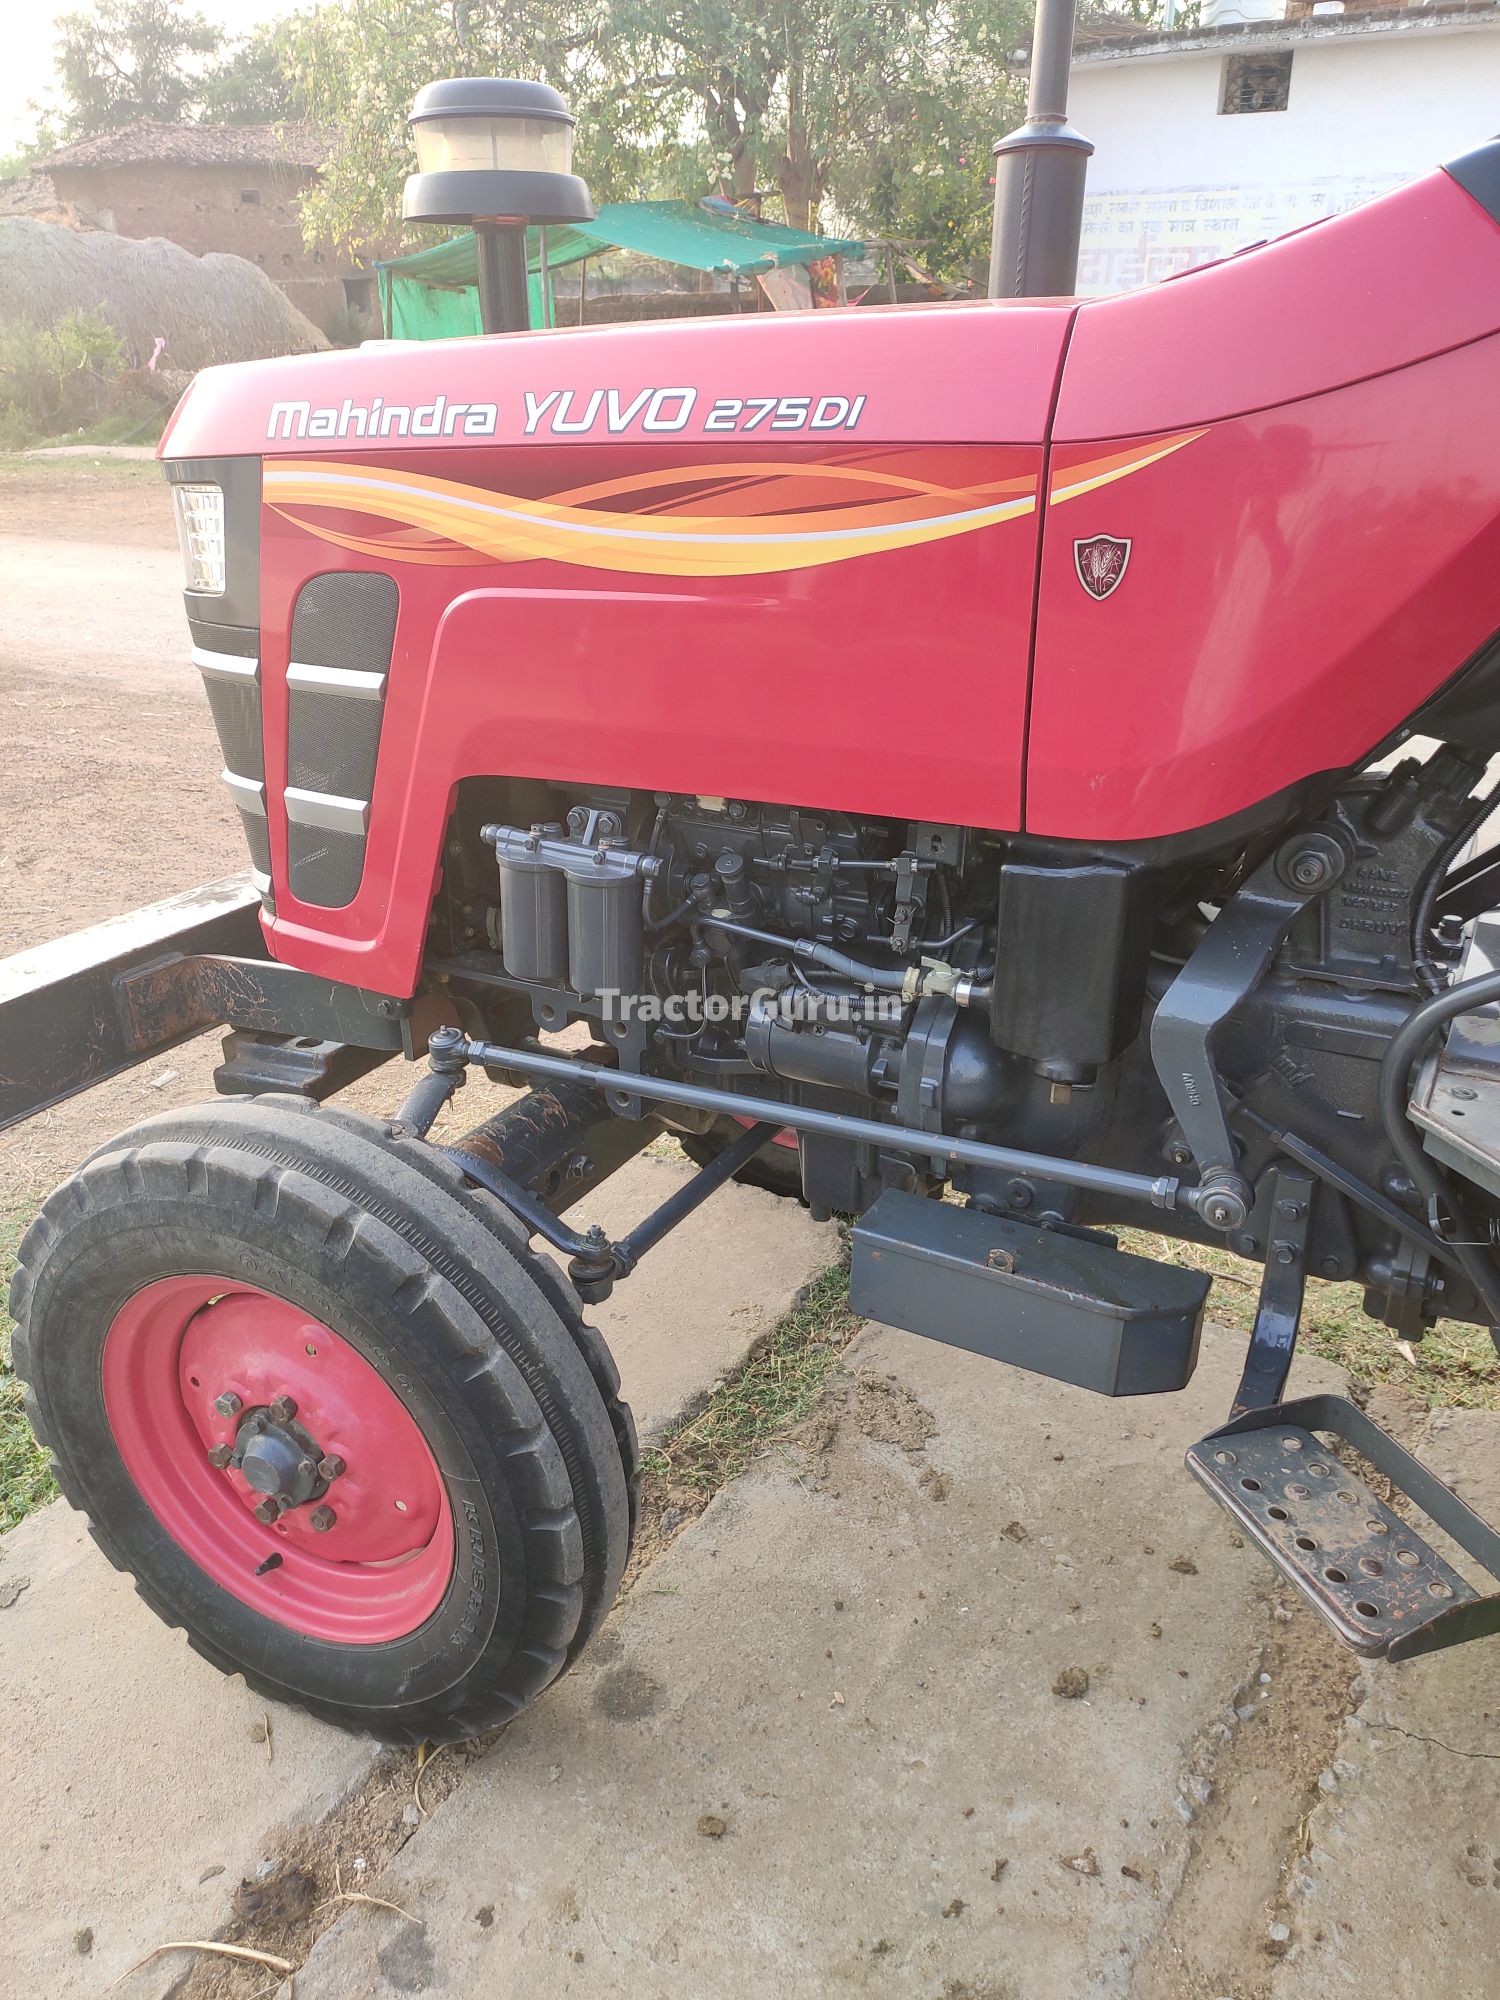 Get Second Hand Mahindra 275 Yuvo Tractor in Good Condition - 3338